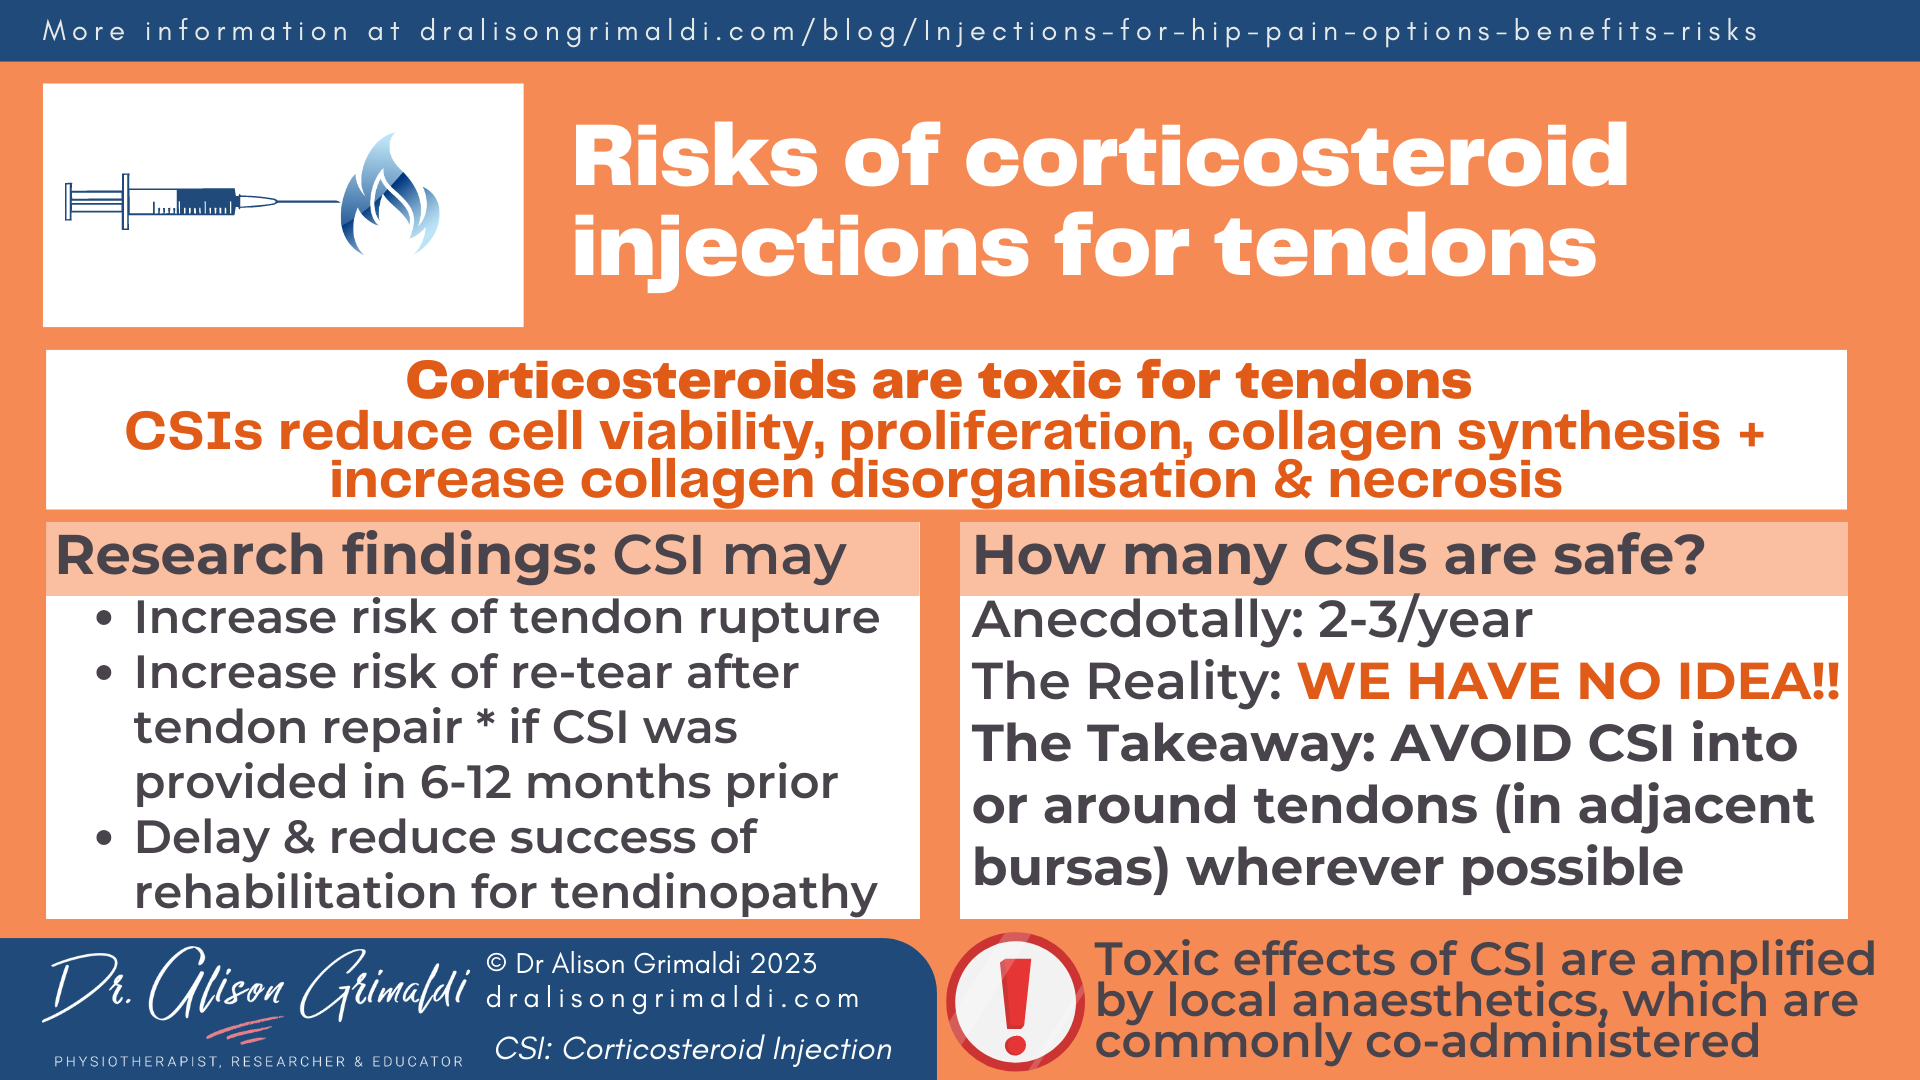 Risks of corticosteroid injections for tendons